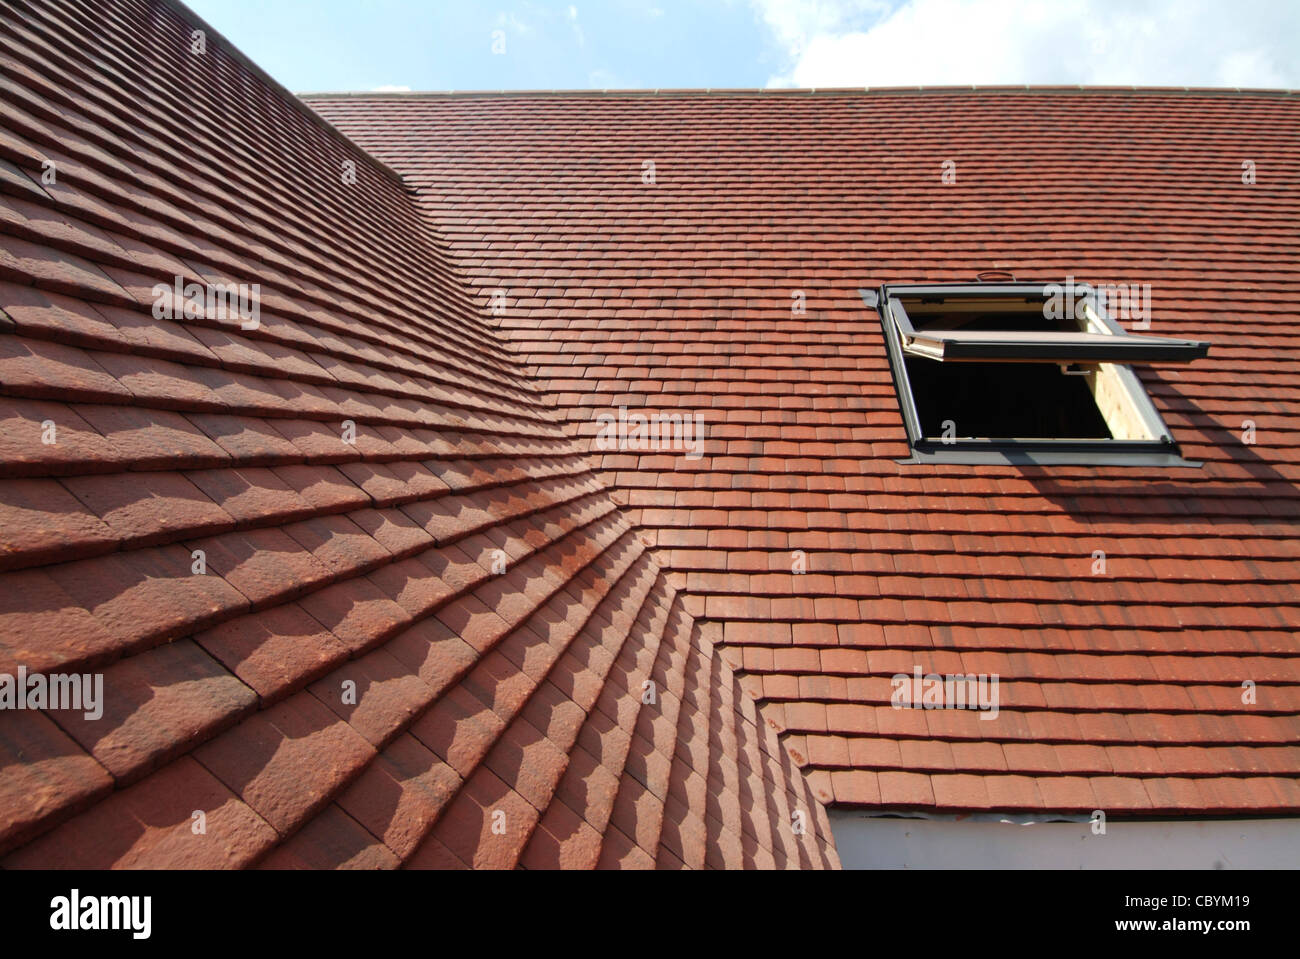 New roof tiling on a refurbished detached house including Velux type window Essex England UK Stock Photo